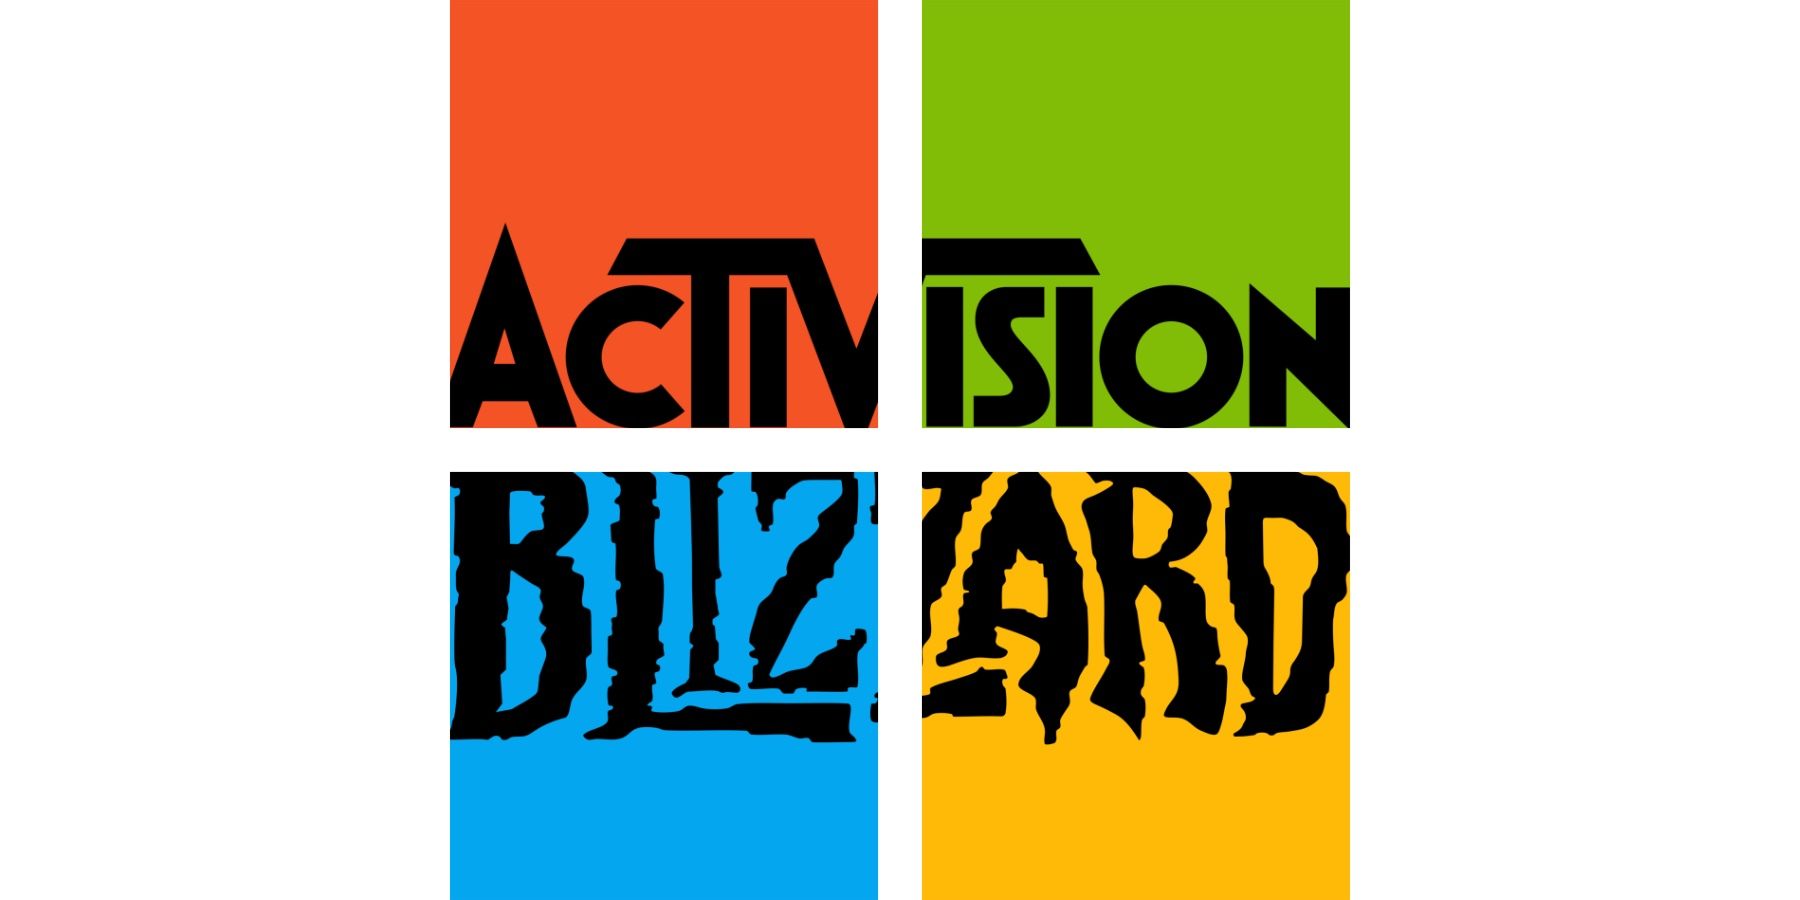 Microsoft completes acquisition of Activision Blizzard - Overclocking.com